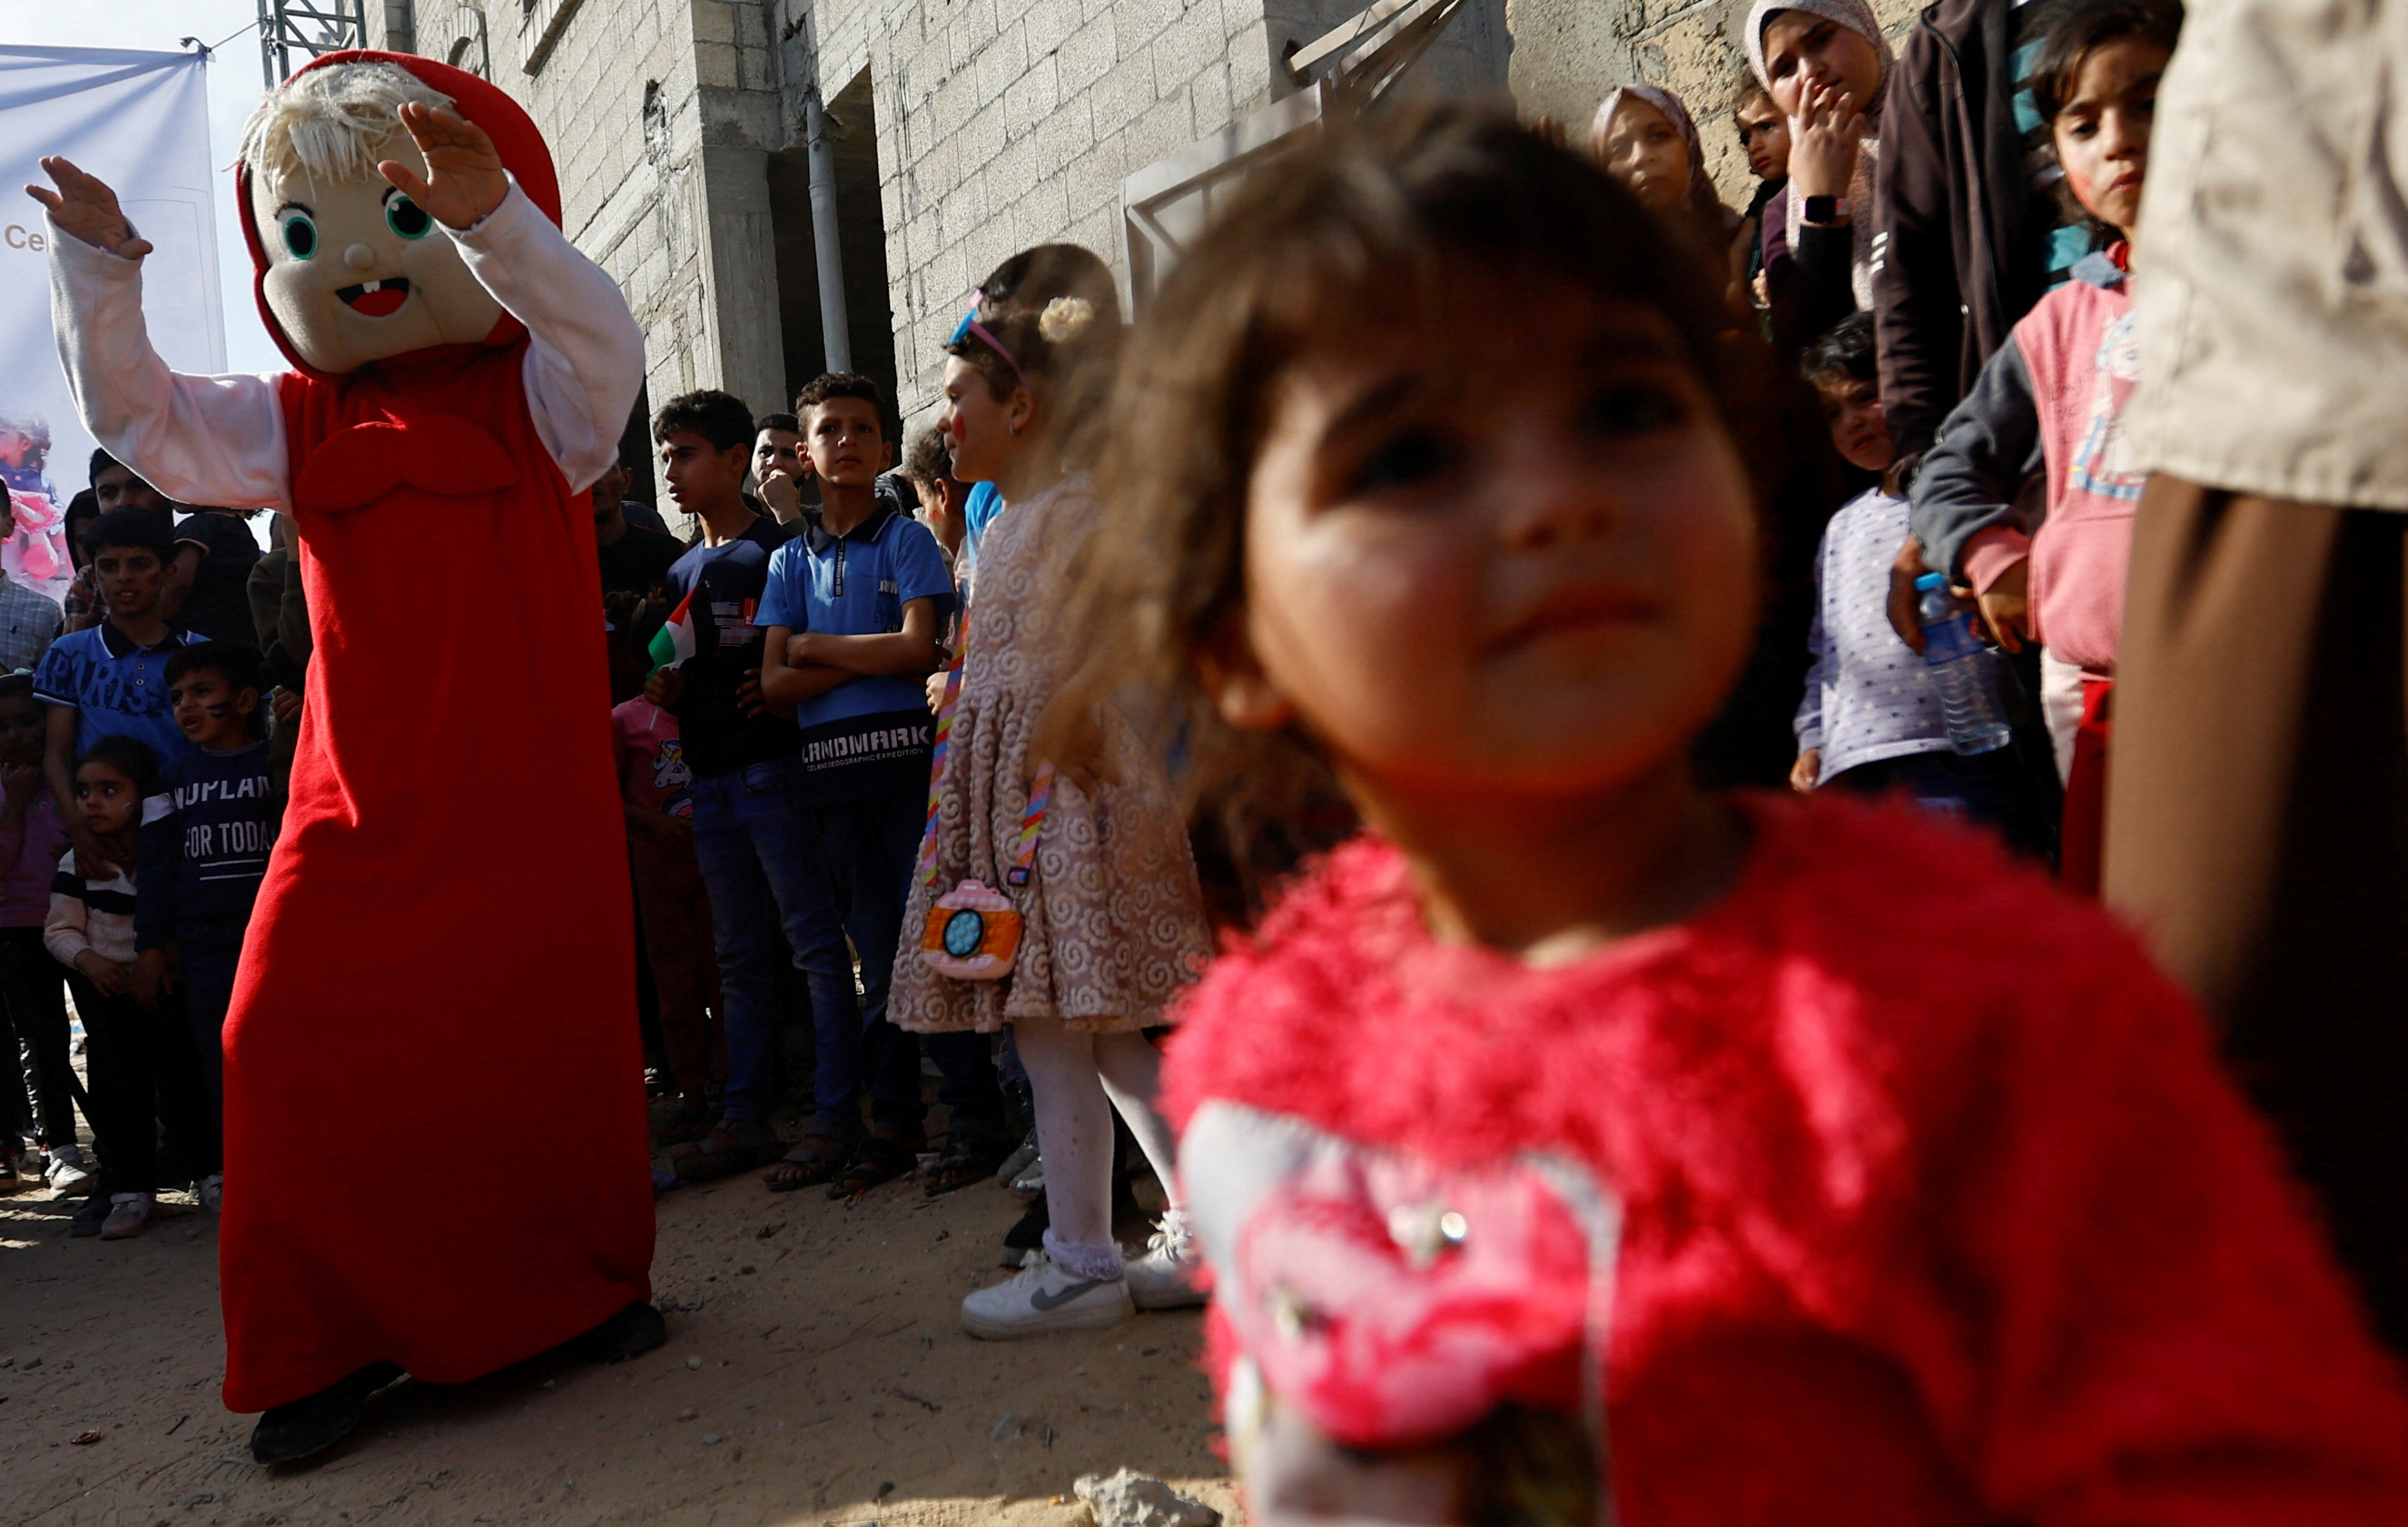 A girl looks on as a Palestinian dressed in a costume entertains children in Deir al-Balah